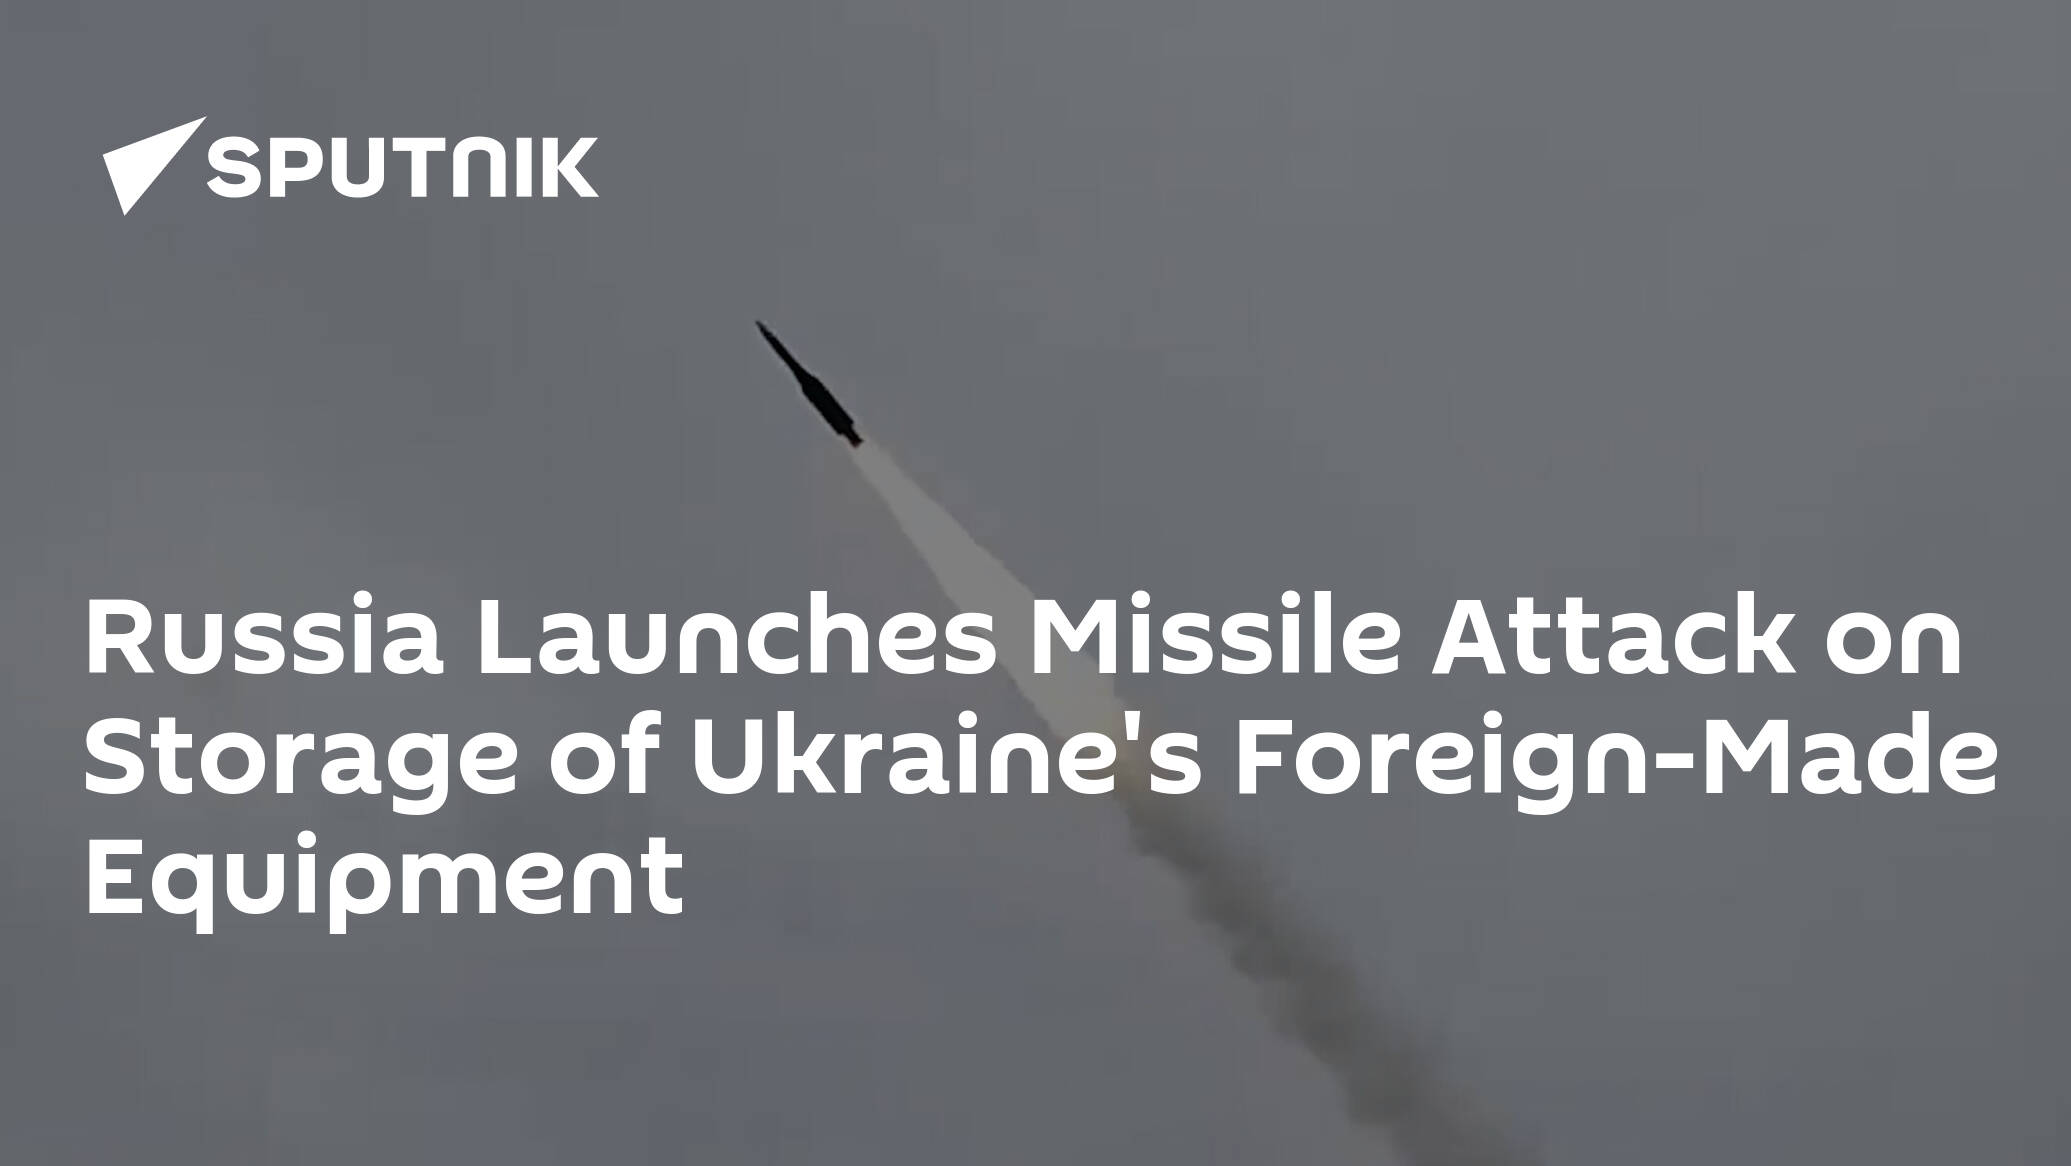 Russia Launches Missile Attack on Storage of Ukraine's Foreign-Made Equipment